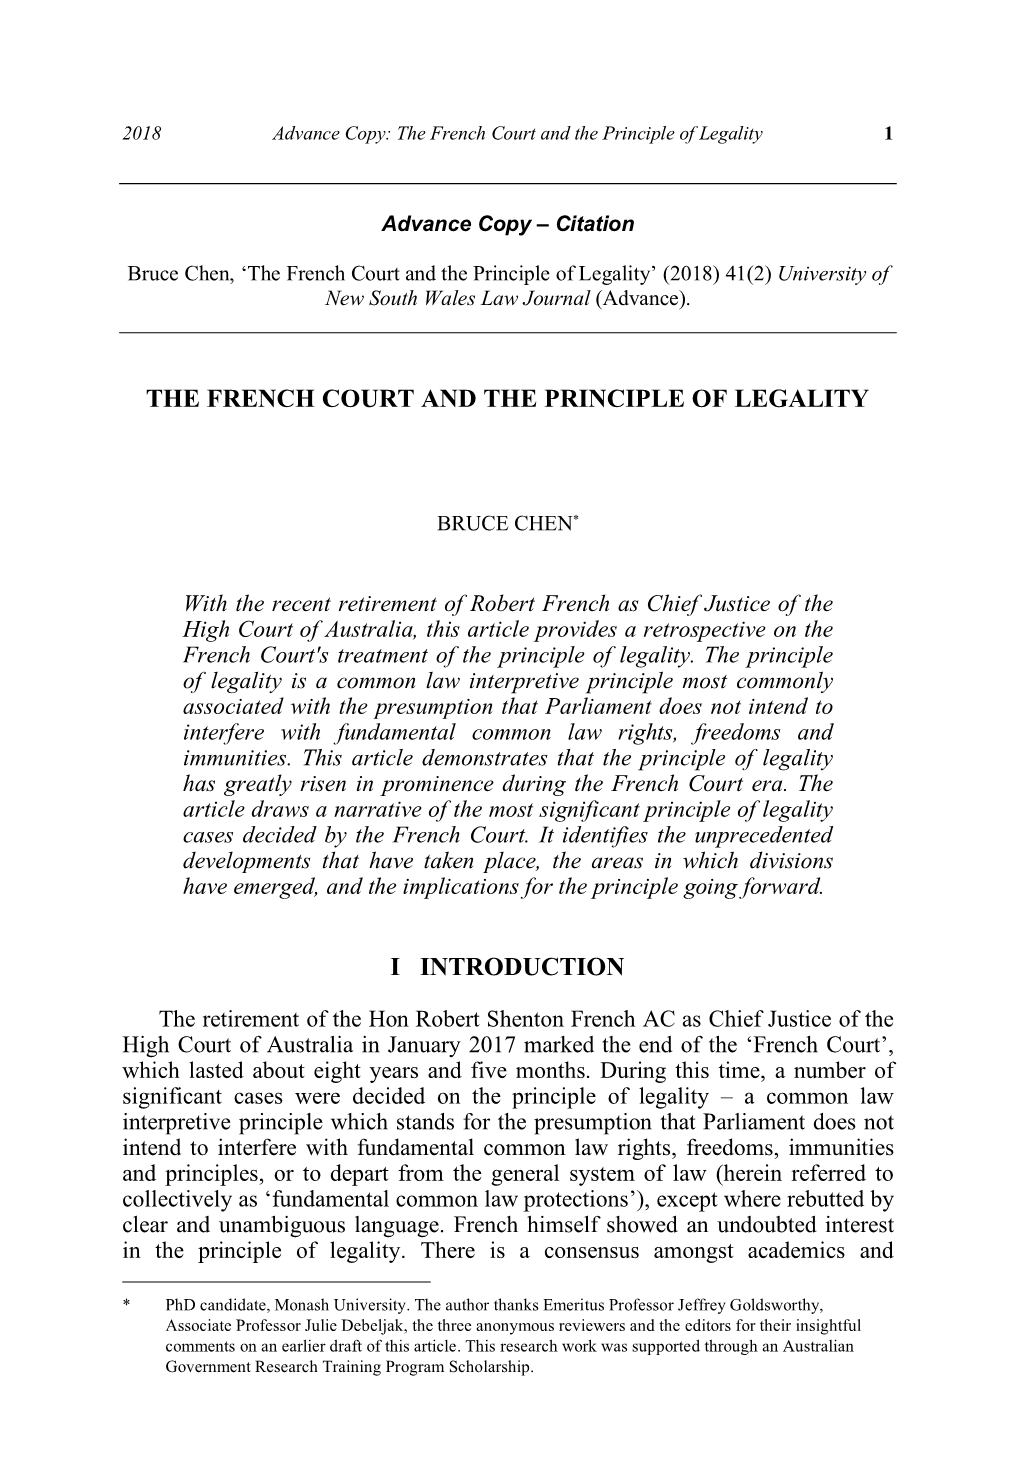 The French Court and the Principle of Legality I